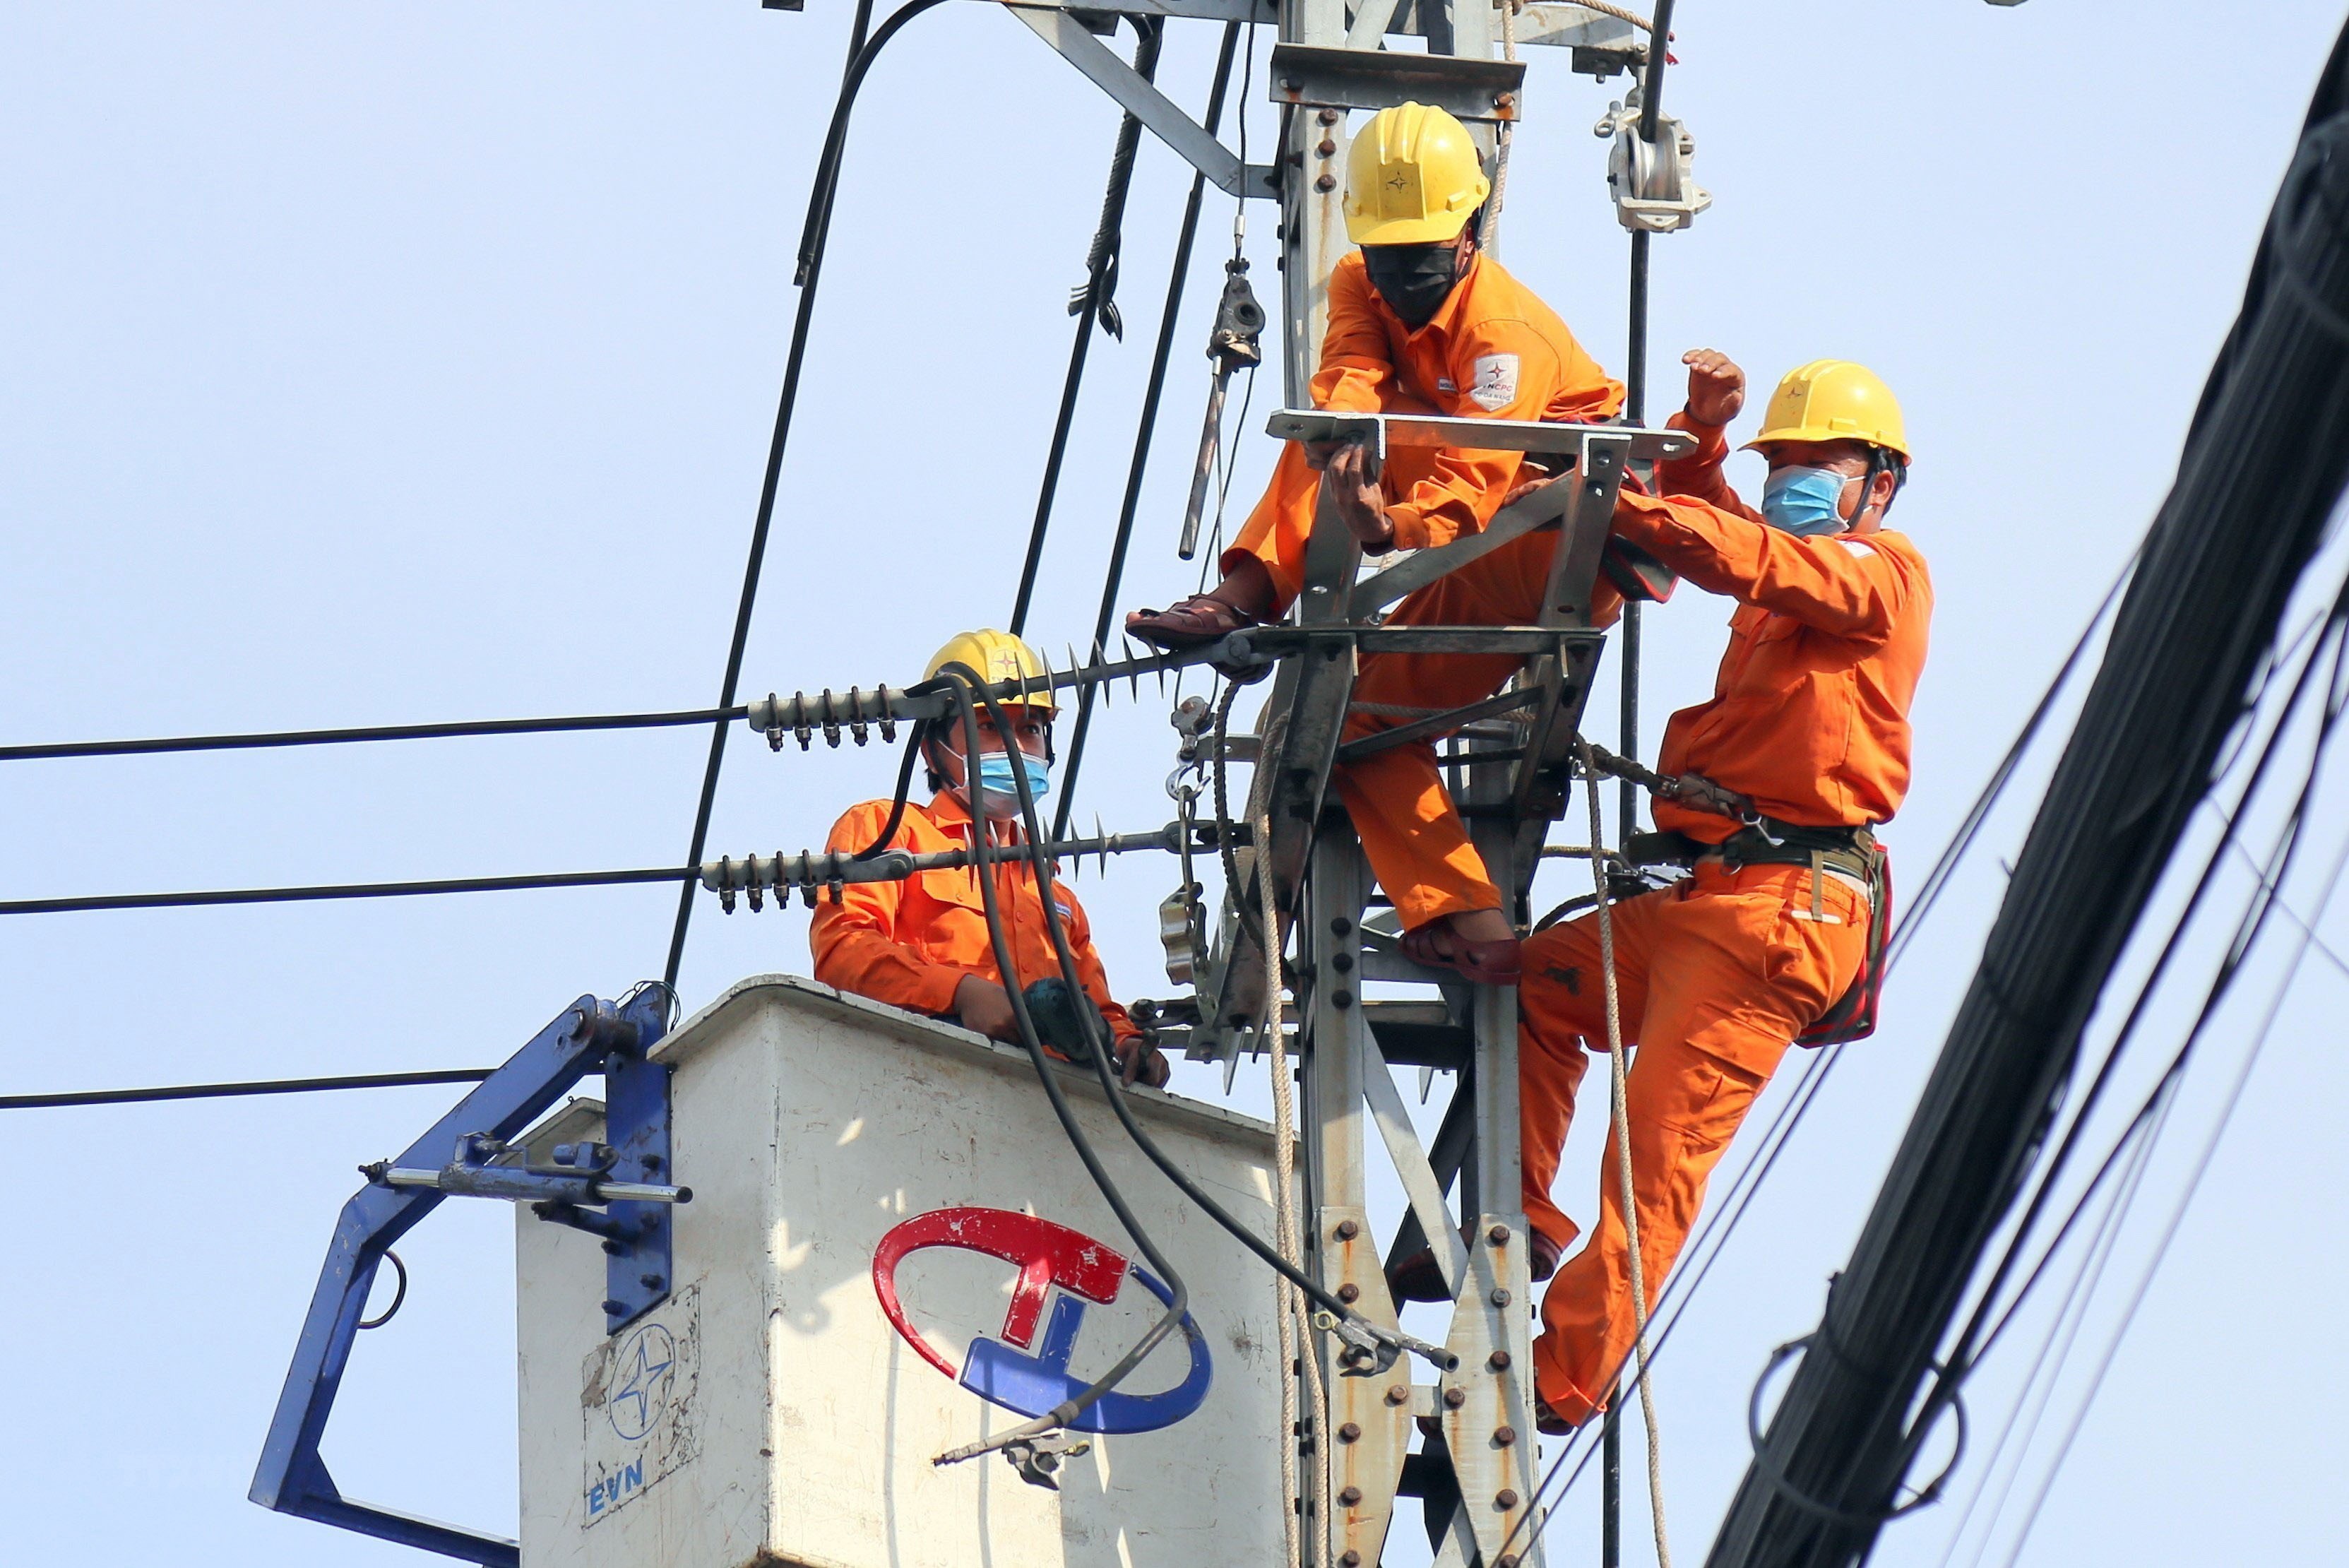 Reporting regime of provincial electricity companies and Power Corporations in Vietnam